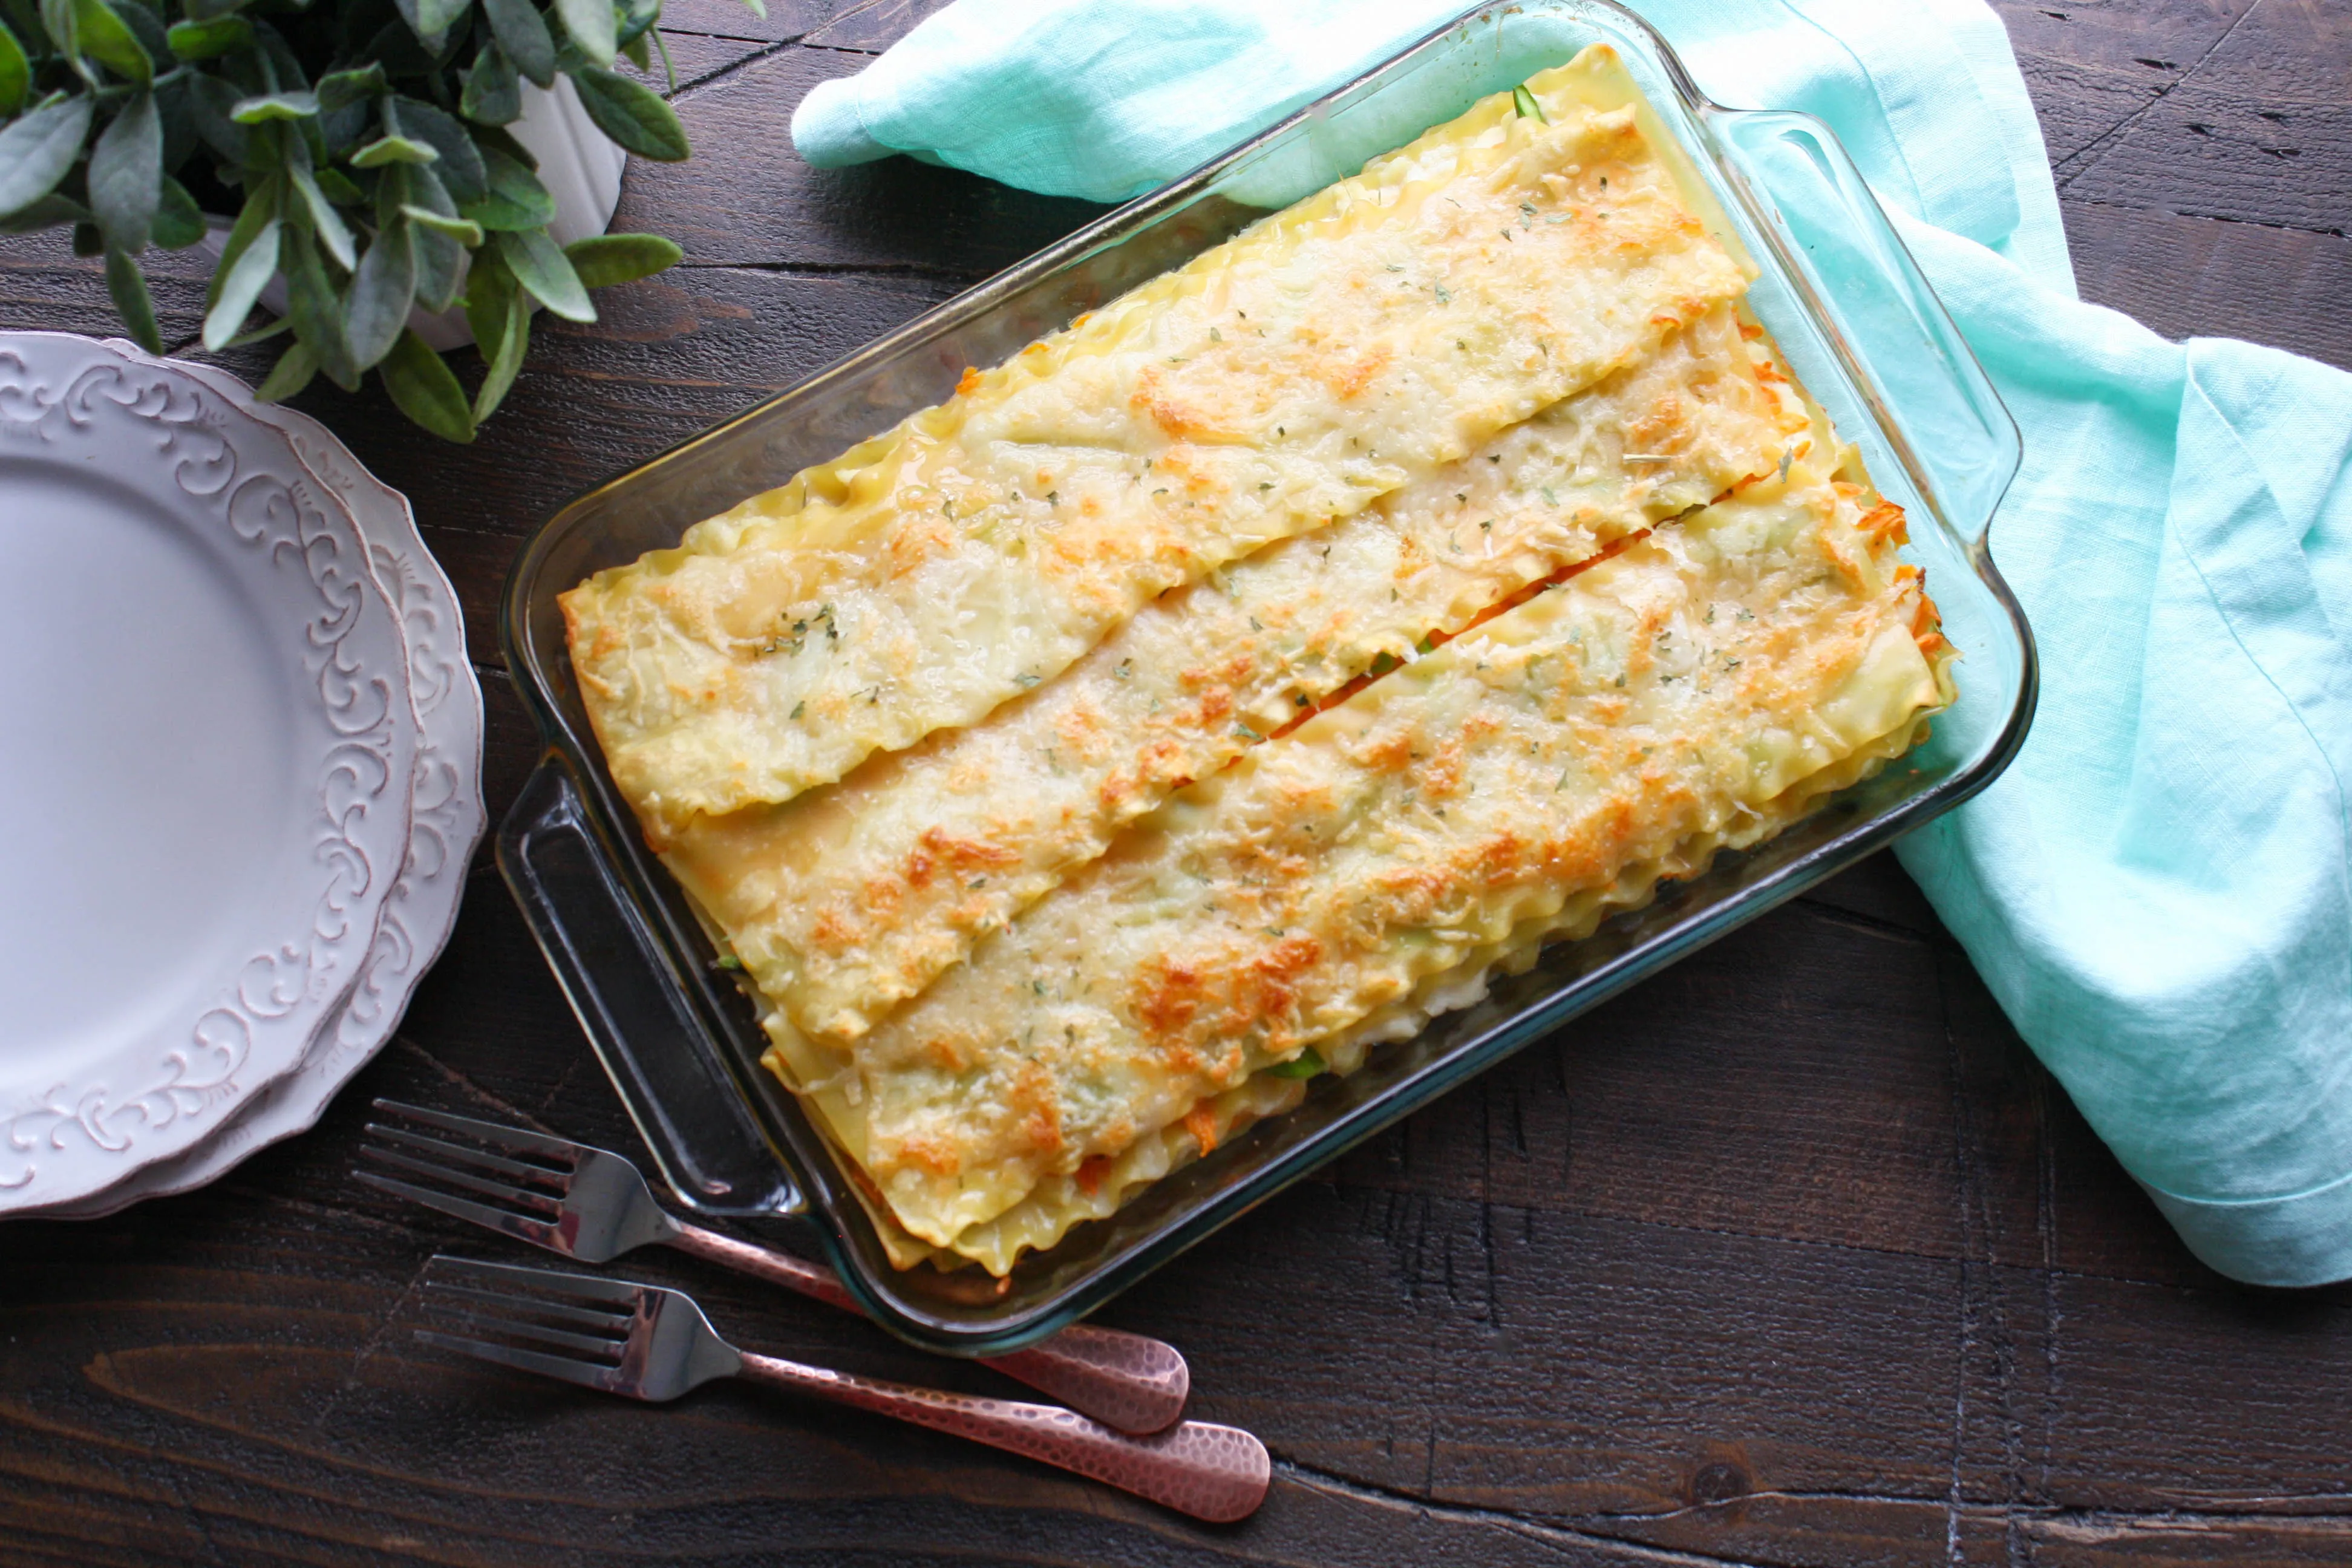 Asparagus and Sweet Potato Lasagna is a fabulous meal everyone will love. Asparagus and Sweet Potato Lasagna is creamy and colorful, and super tasty!